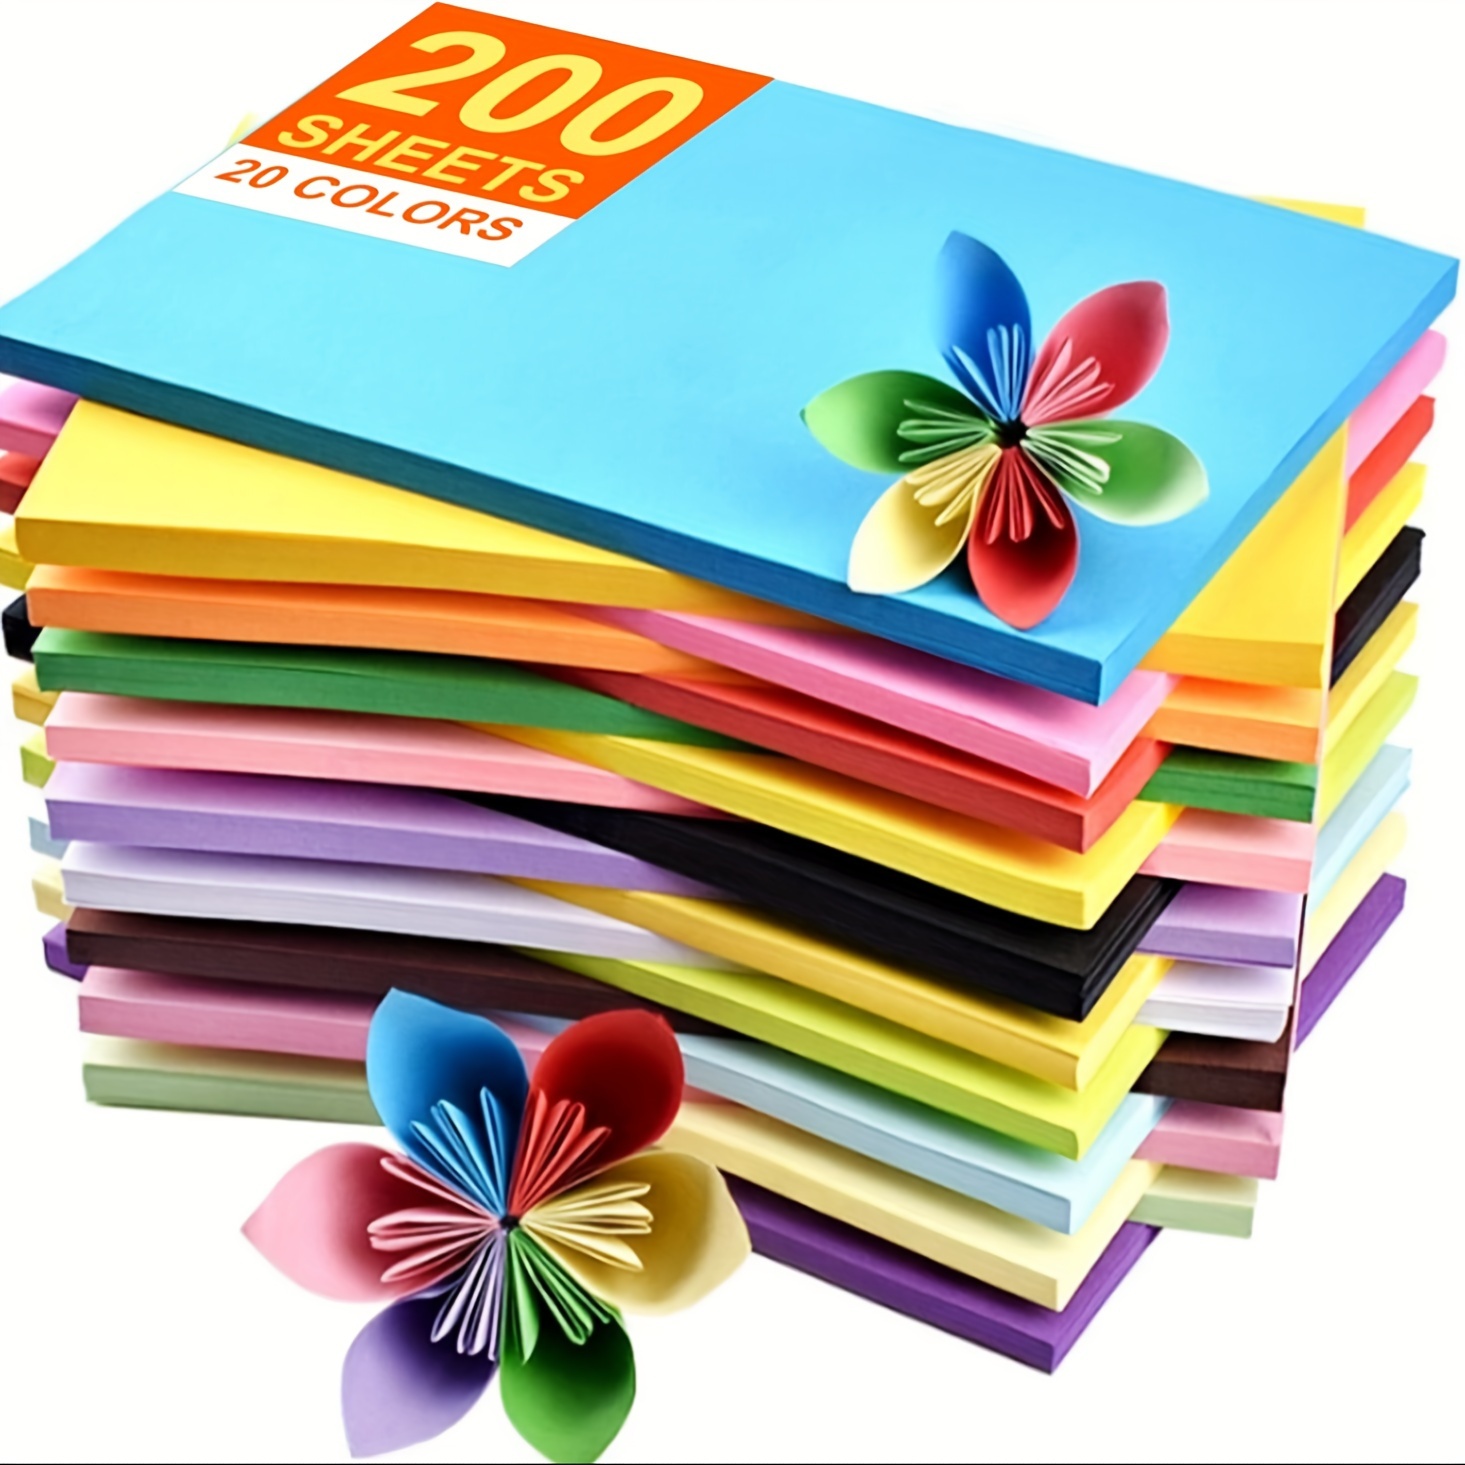 

Firstop A4 Craft Paper - 100/200 Sheets, 20 Vibrant Colors, 8"x12", Premium Quality, Smooth & Easy Fold For Origami, Diy Projects, Greeting Cards & More